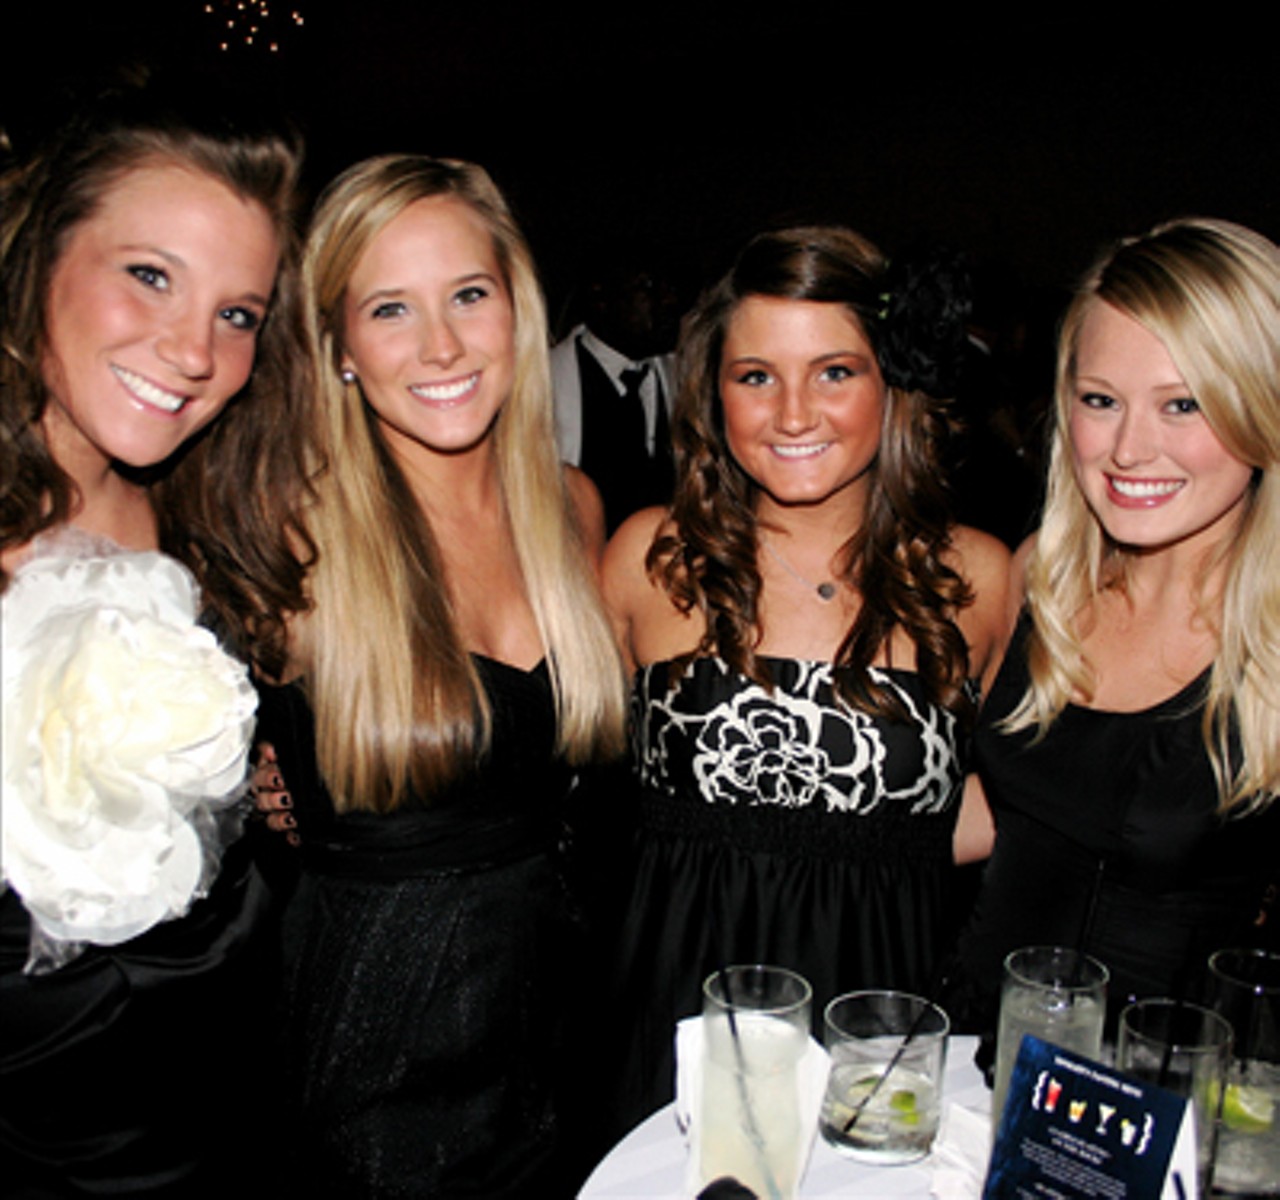 Nelly's Black and White Ball at the Chase Park Plaza